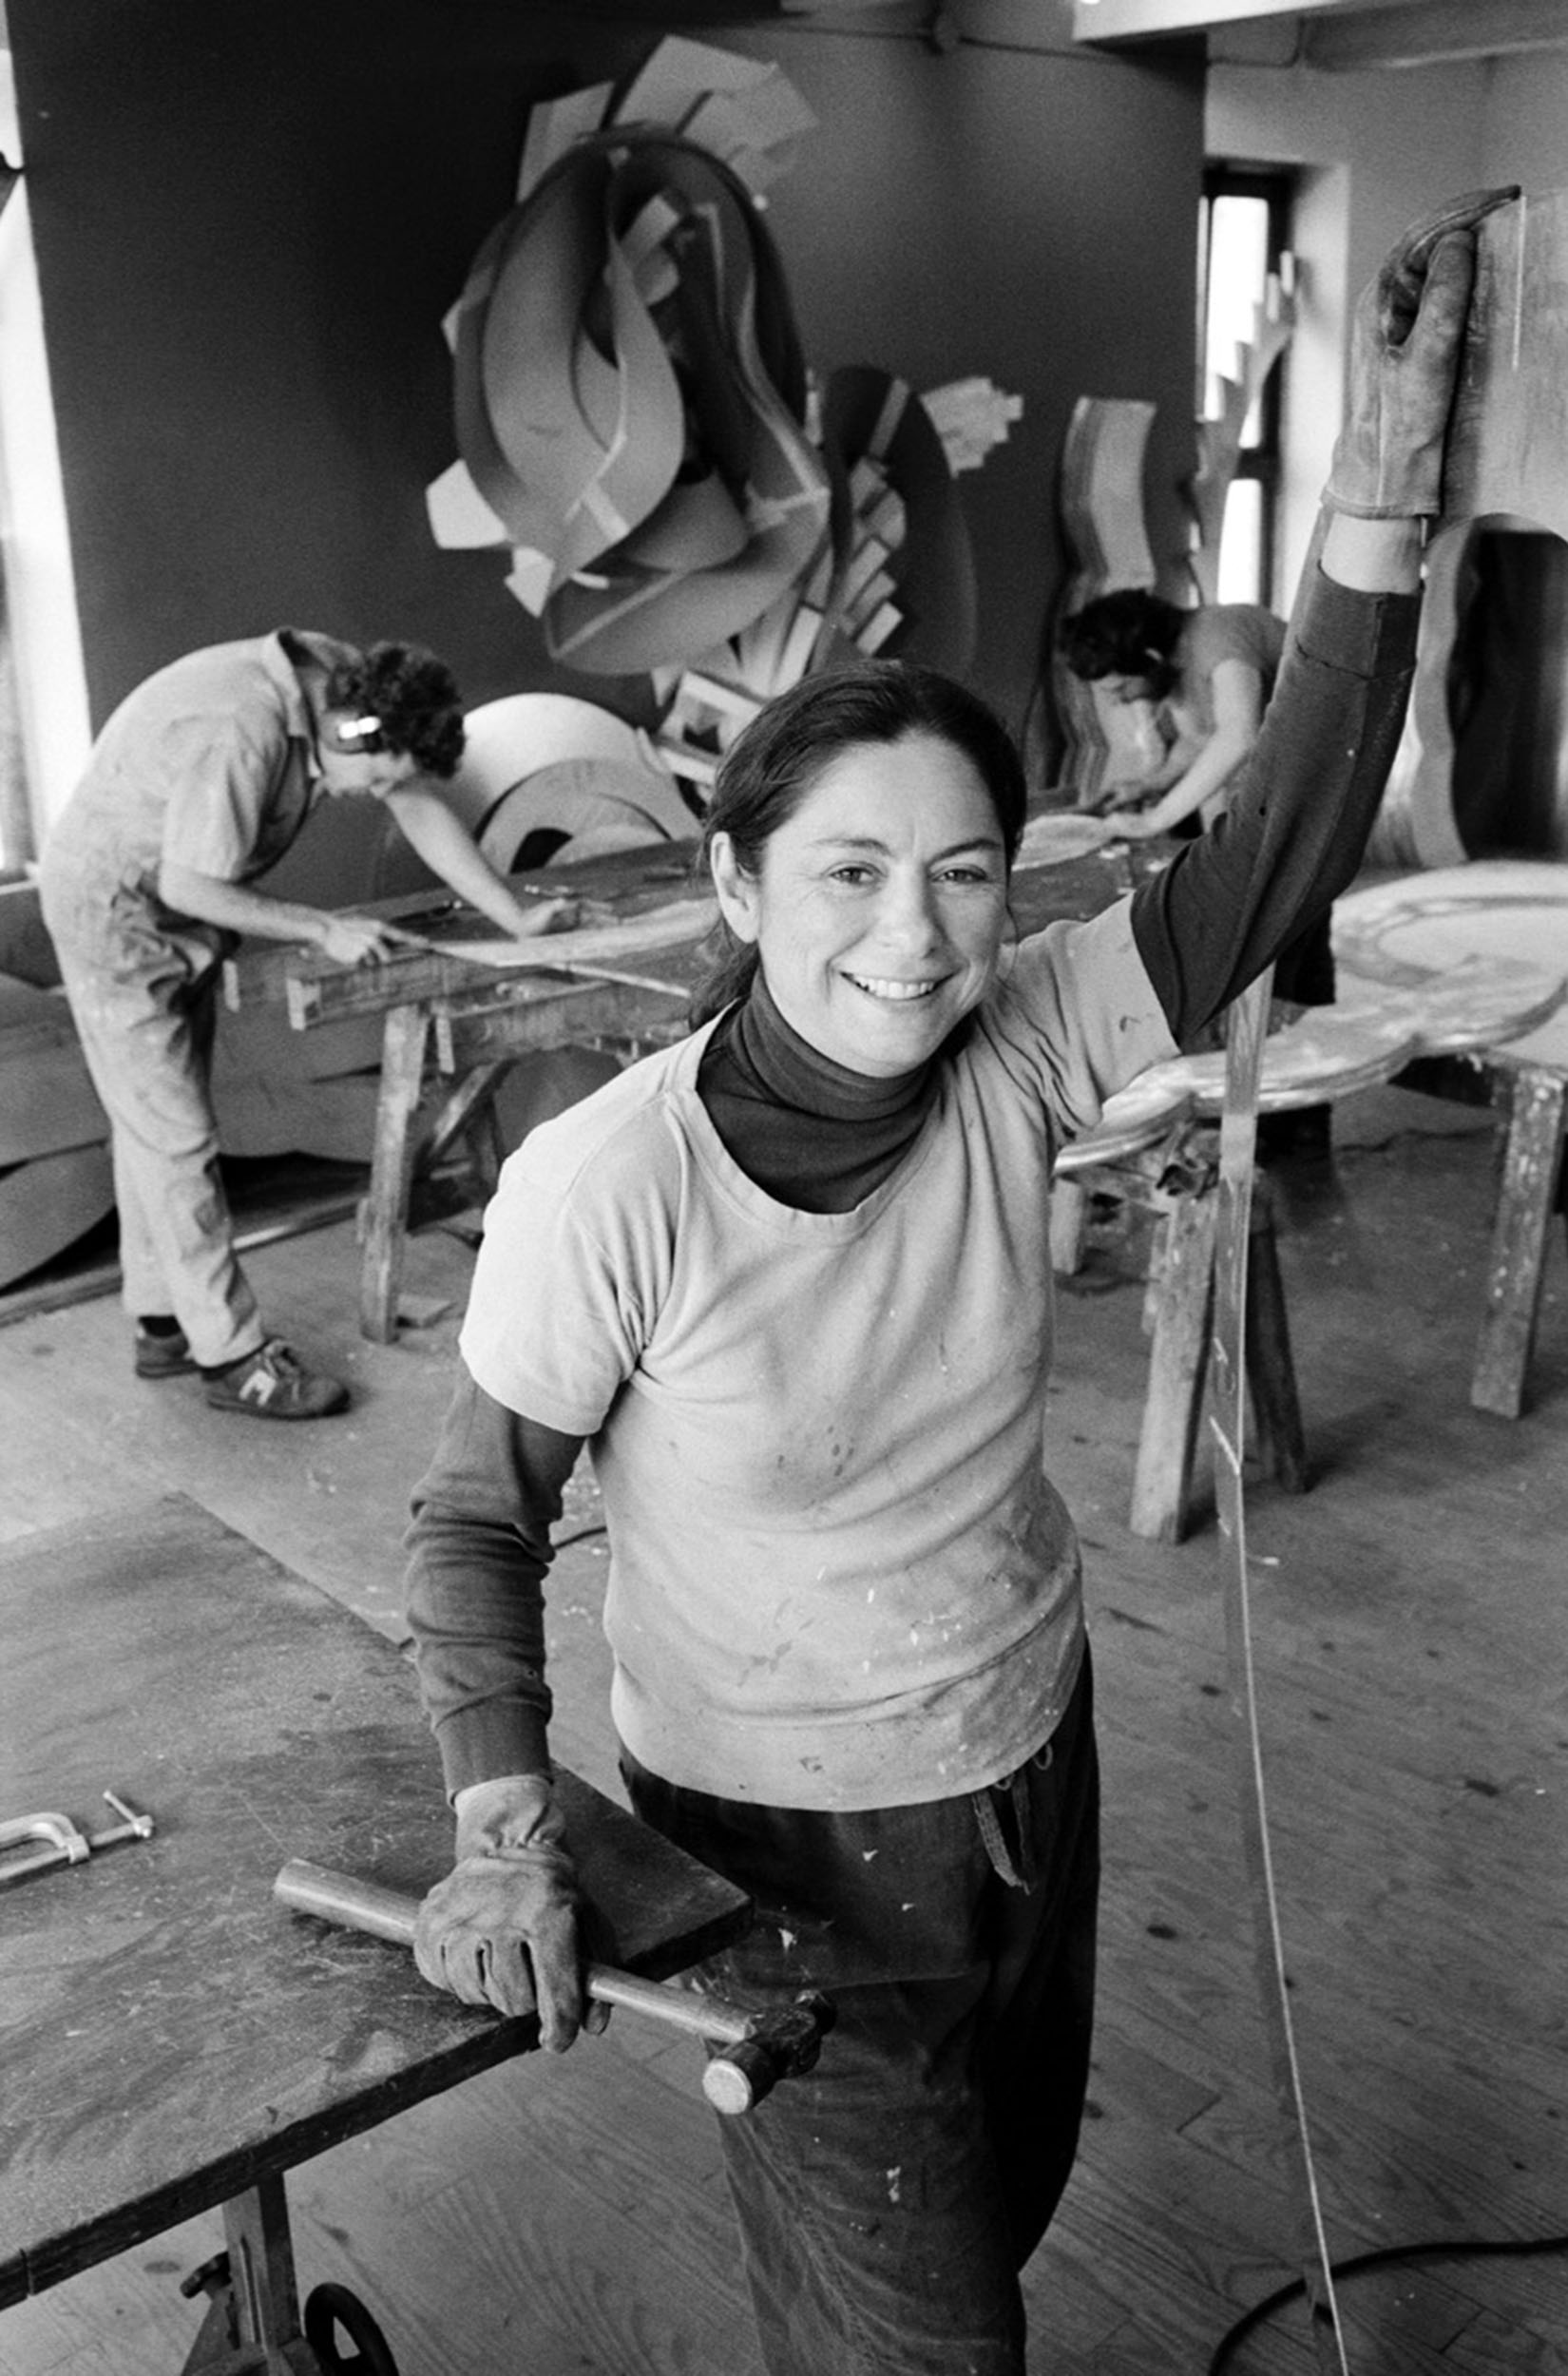 Sculptor Mary Ann Unger at work, wearing work gloves, holding a hammer, and handling metal. She smiles to the camera.